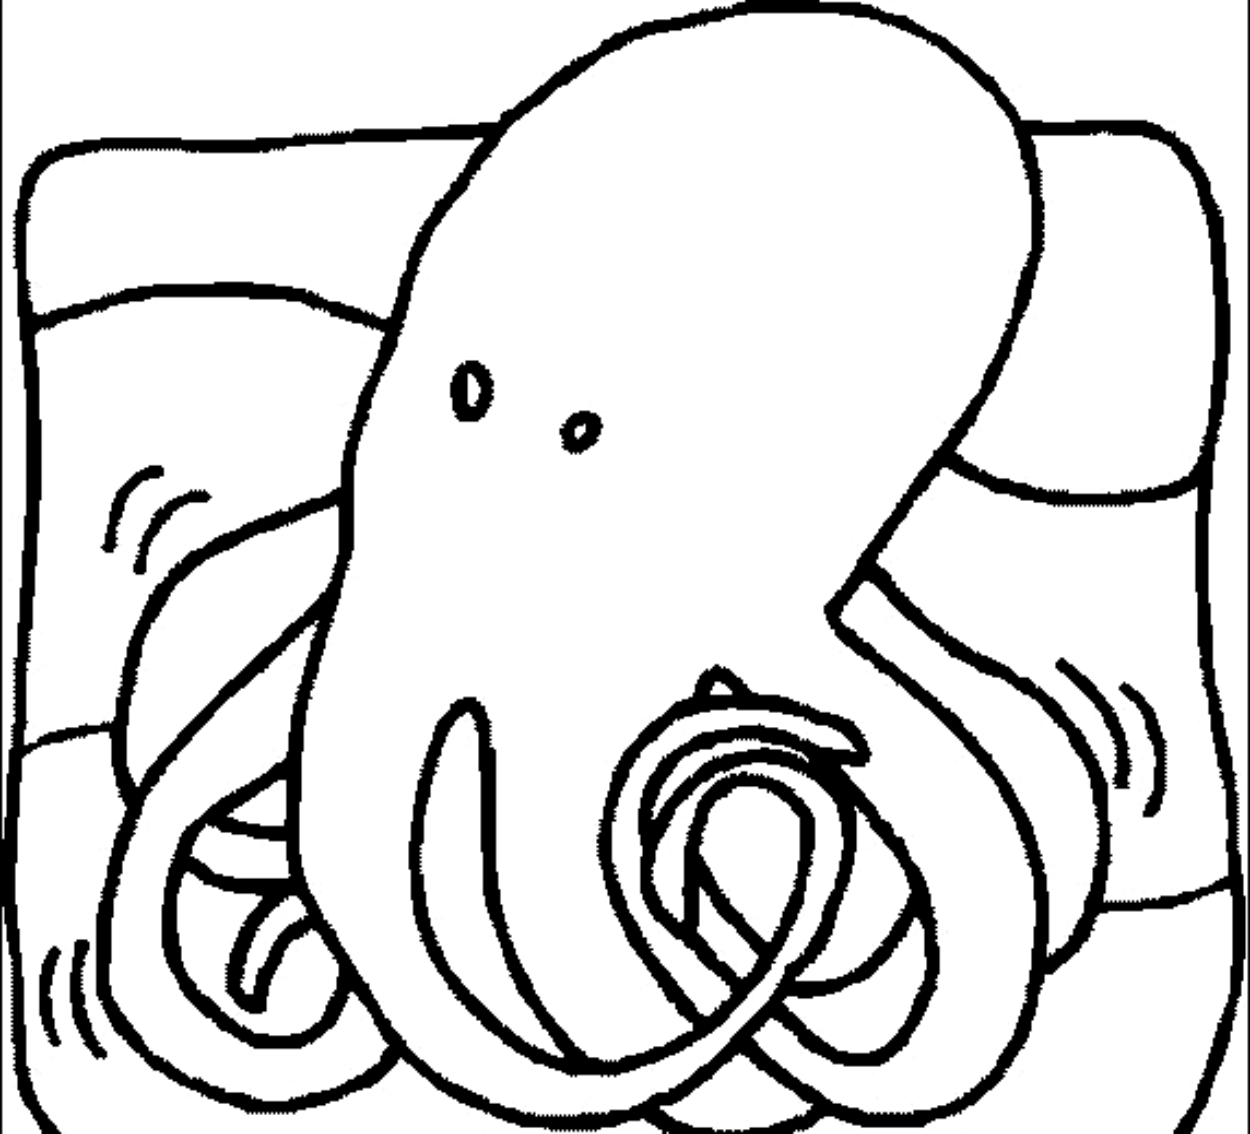 Drawing 7 from Octopus coloring page to print and coloring